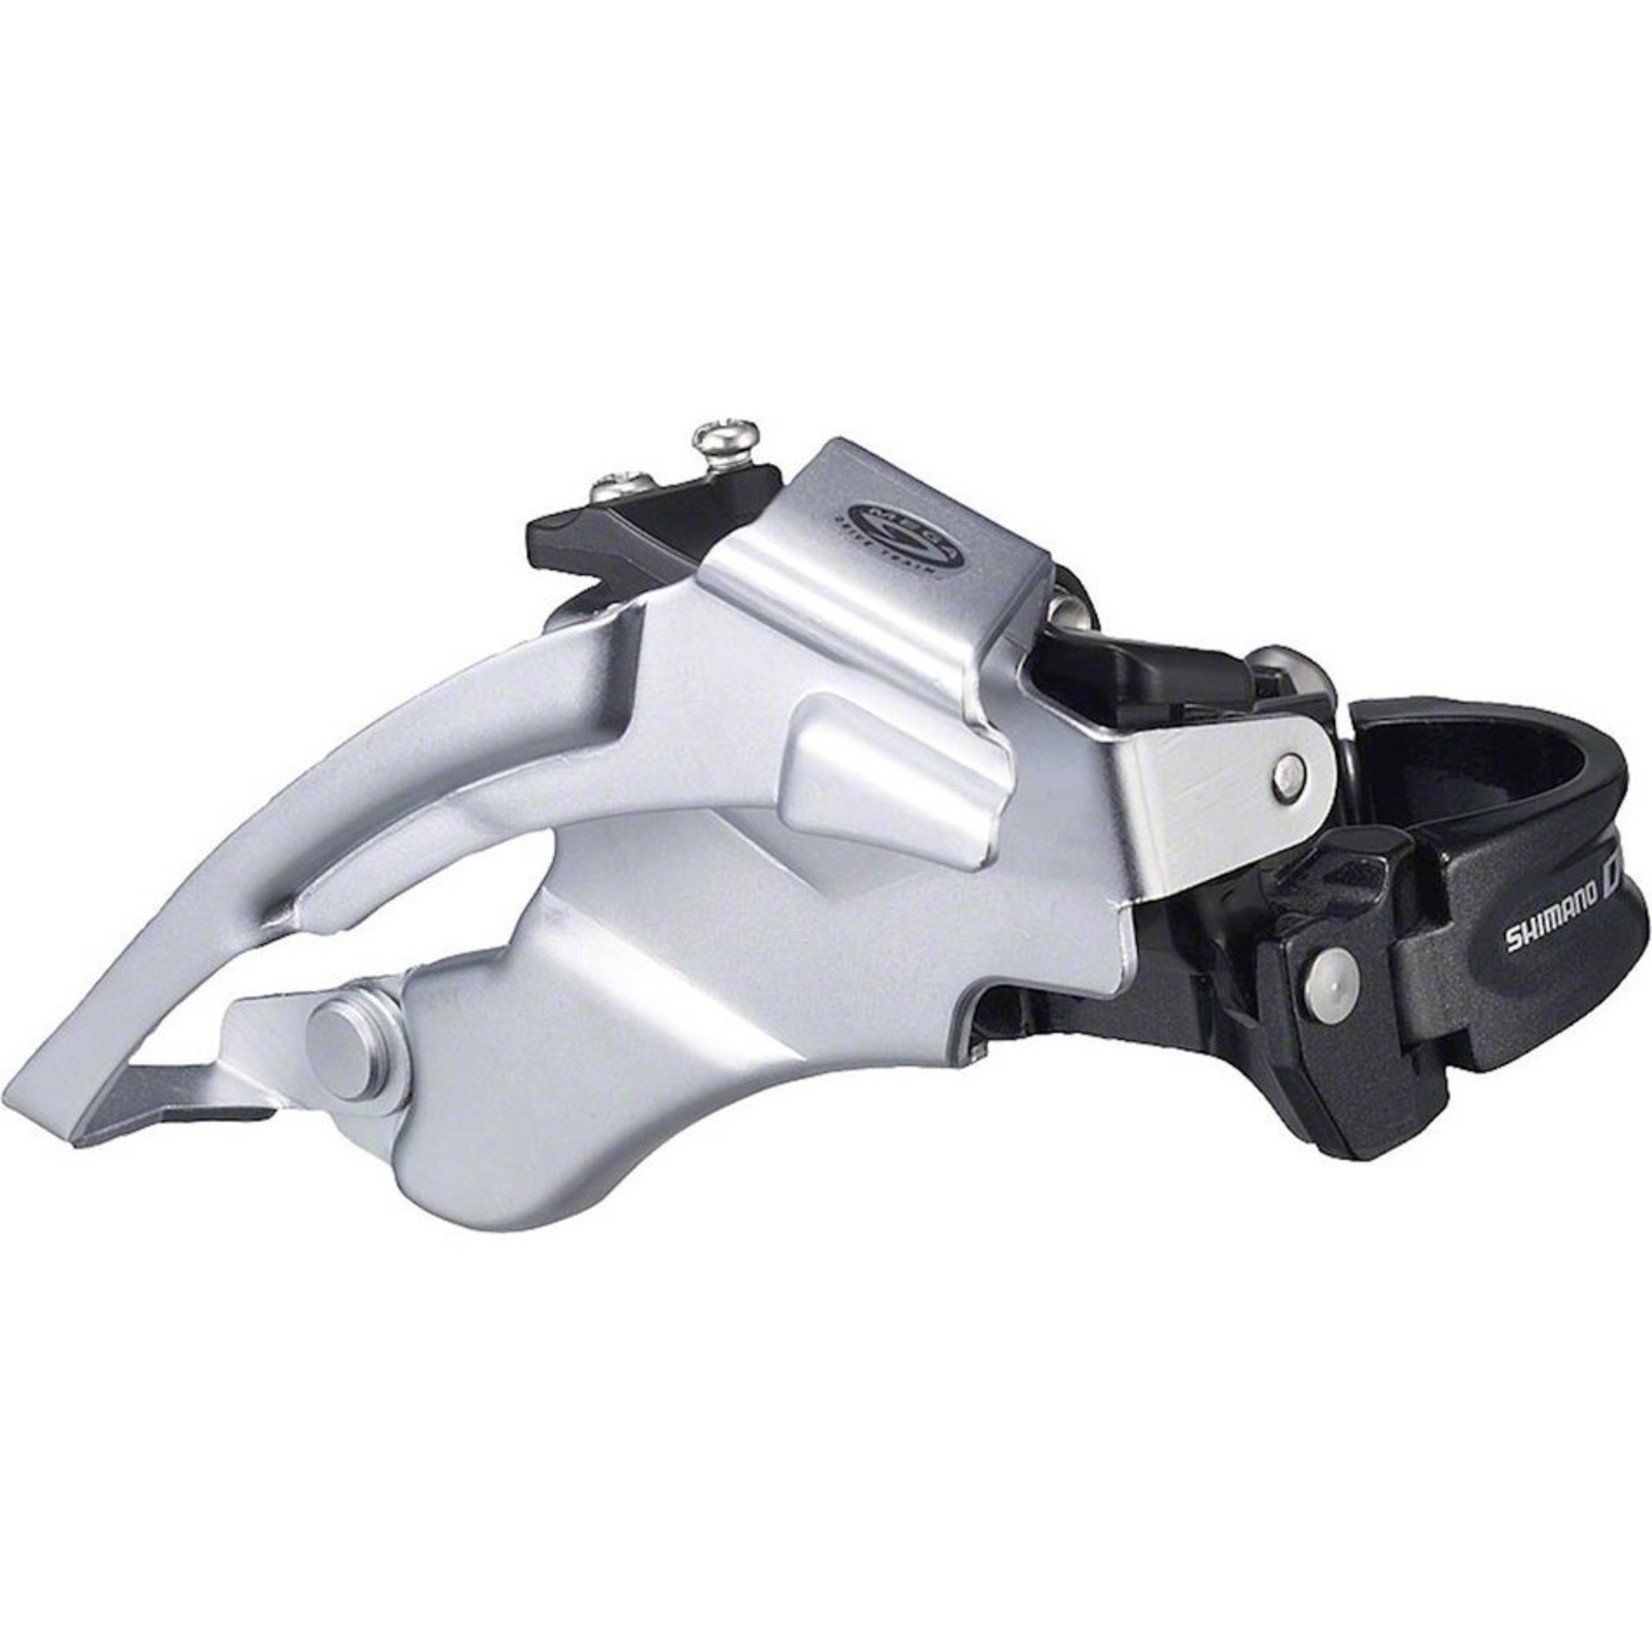 Shimano Shimano Deore FD-M590 Front Derailleur 3x9 Top swing Dual pull Multi clamp For 44/48T